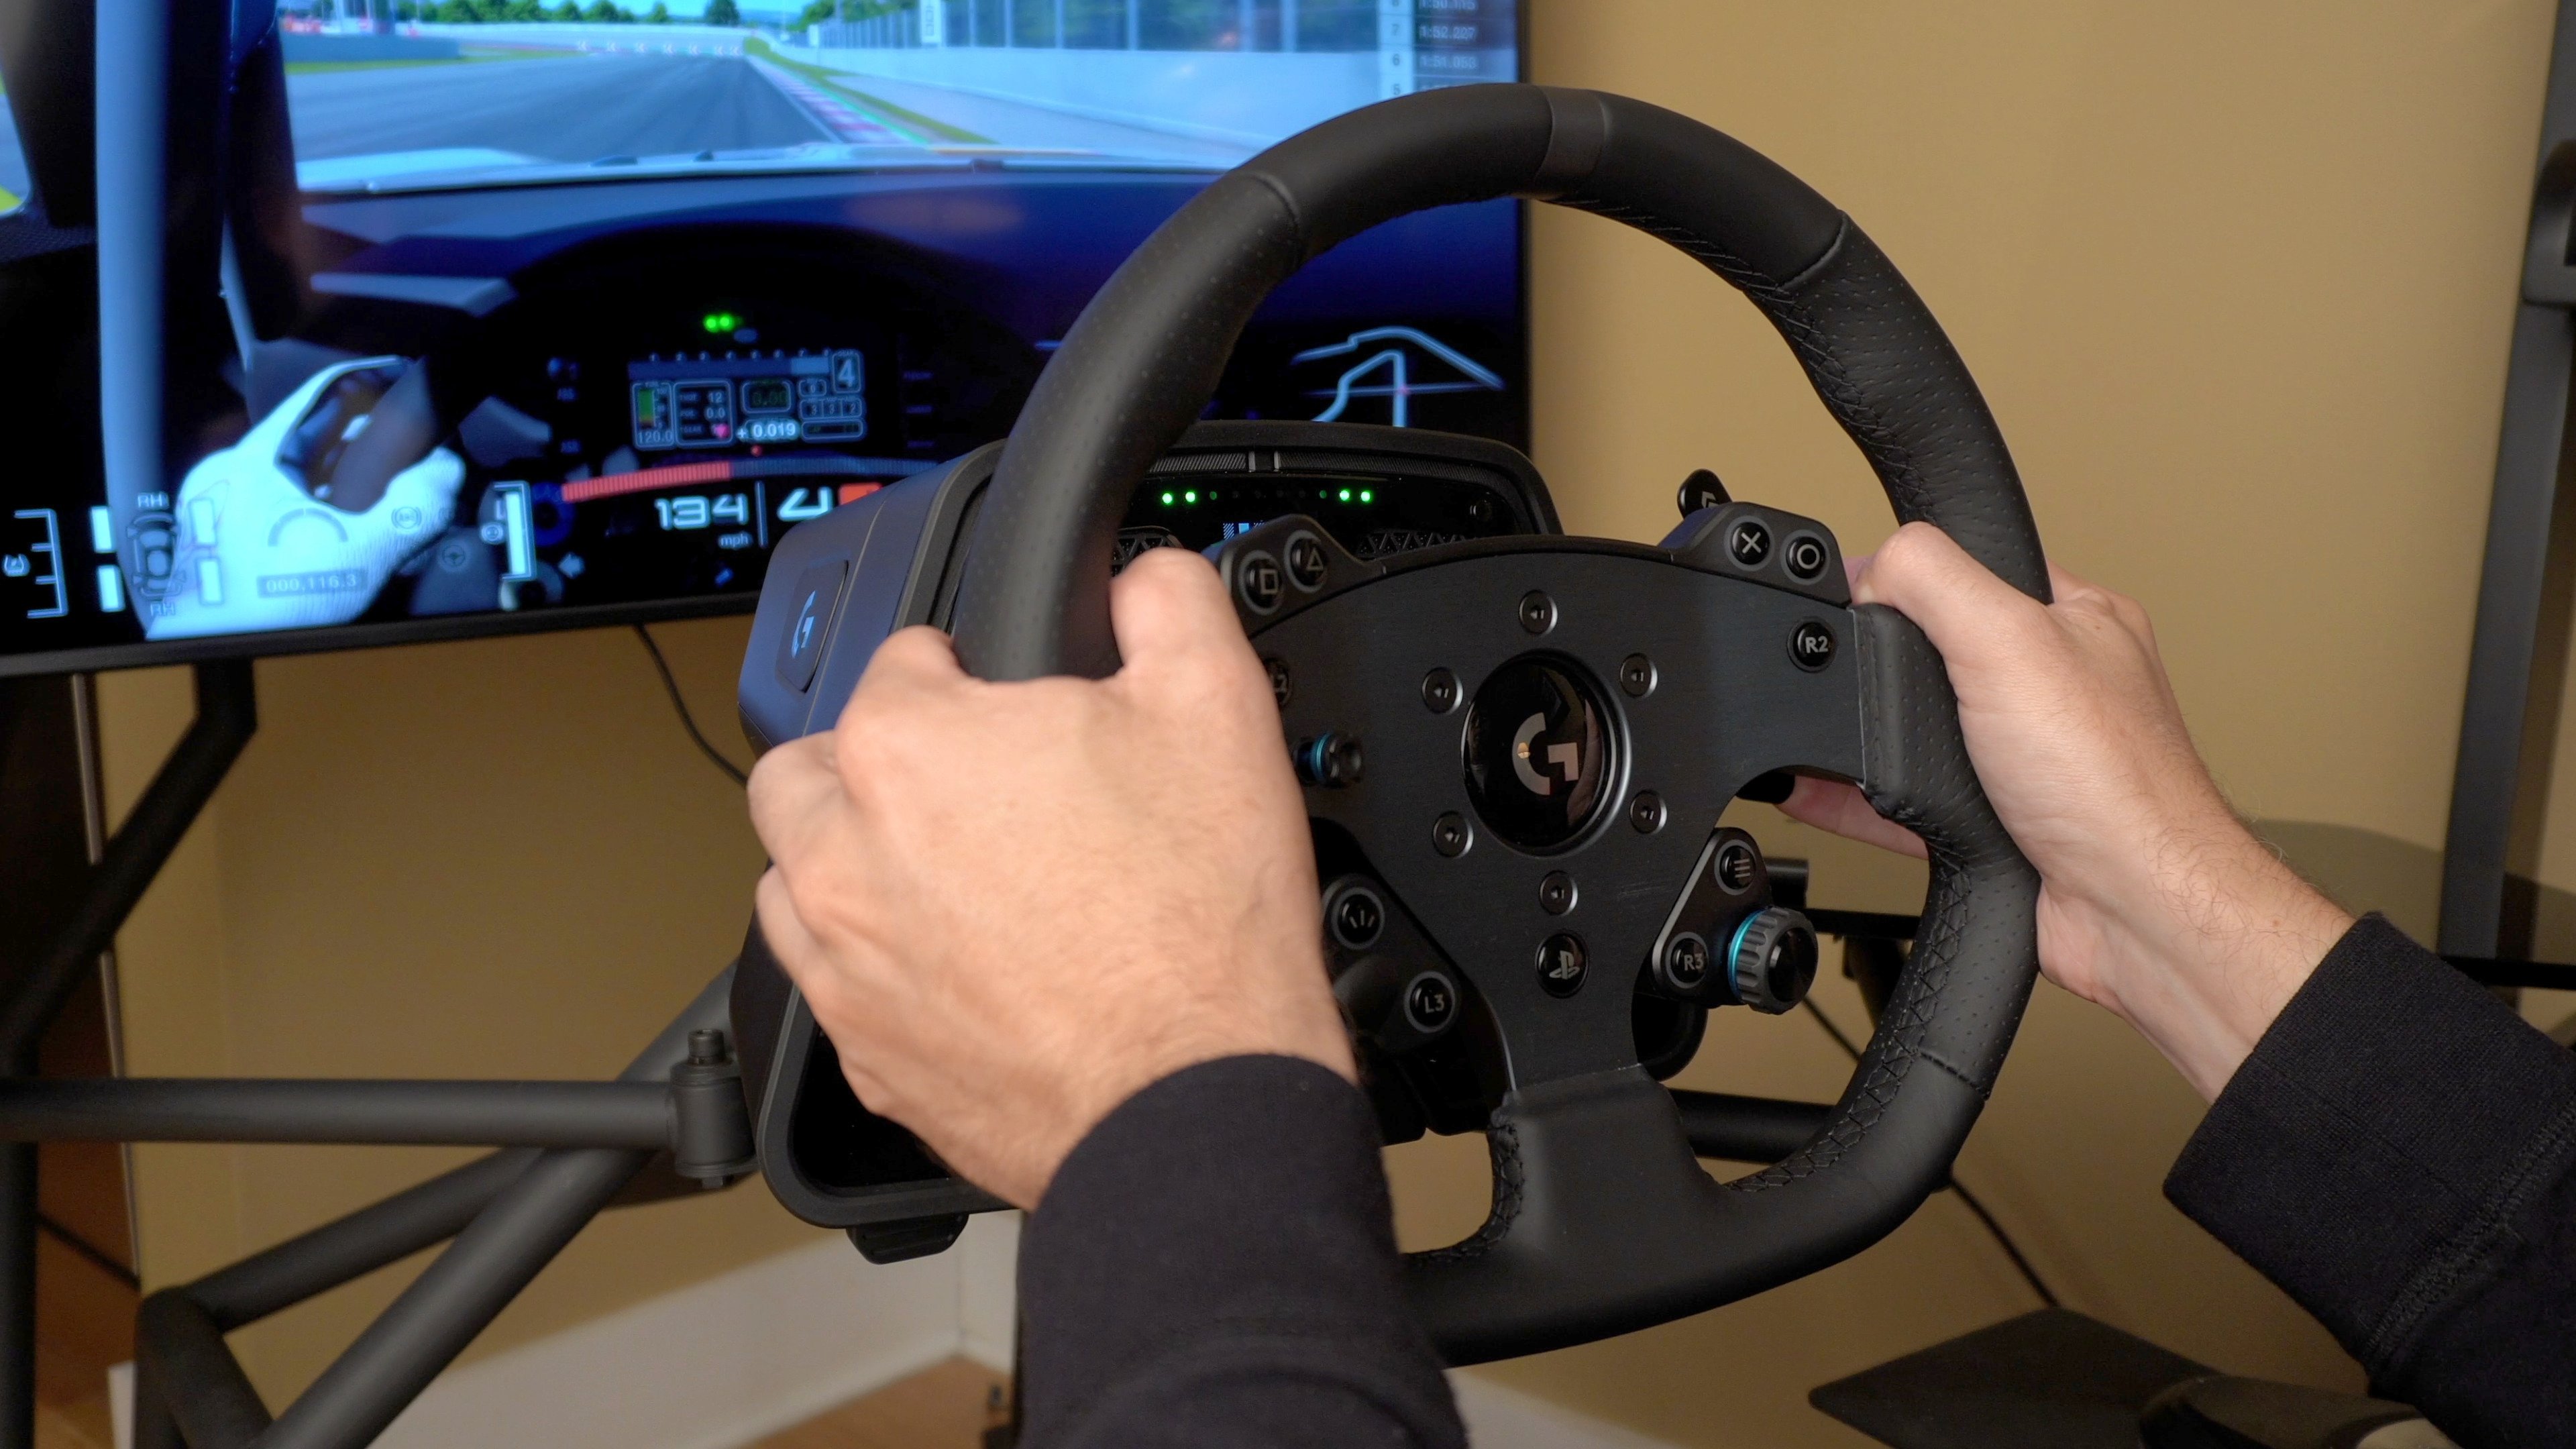 Are You Feeling the Rumble? Troubleshoot a Shaky Steering Wheel